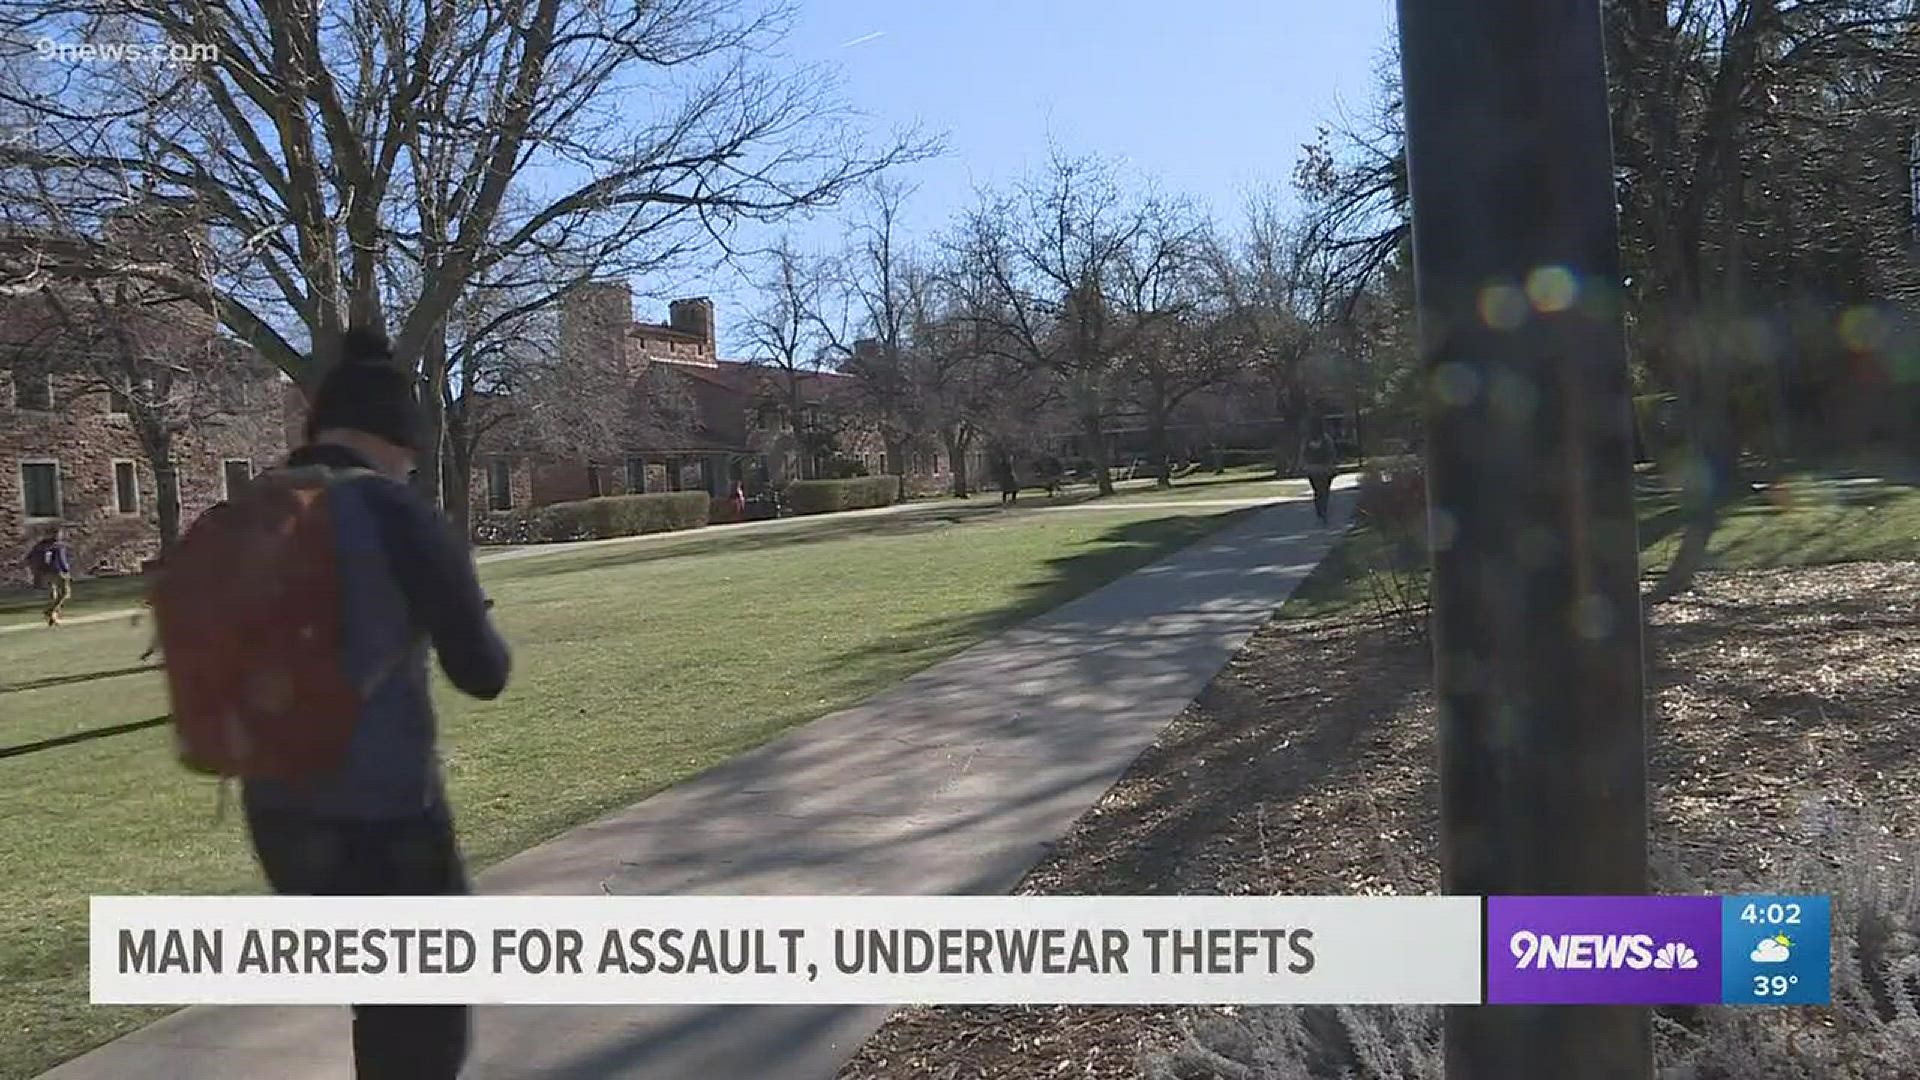 A man accused of breaking into residence halls at CU Boulder and stealing underwear from laundry rooms has been arrested and faces 26 charges related to the incidents. He is also accused of inappropriately touching a young girl in Broomfield on Nov. 23.